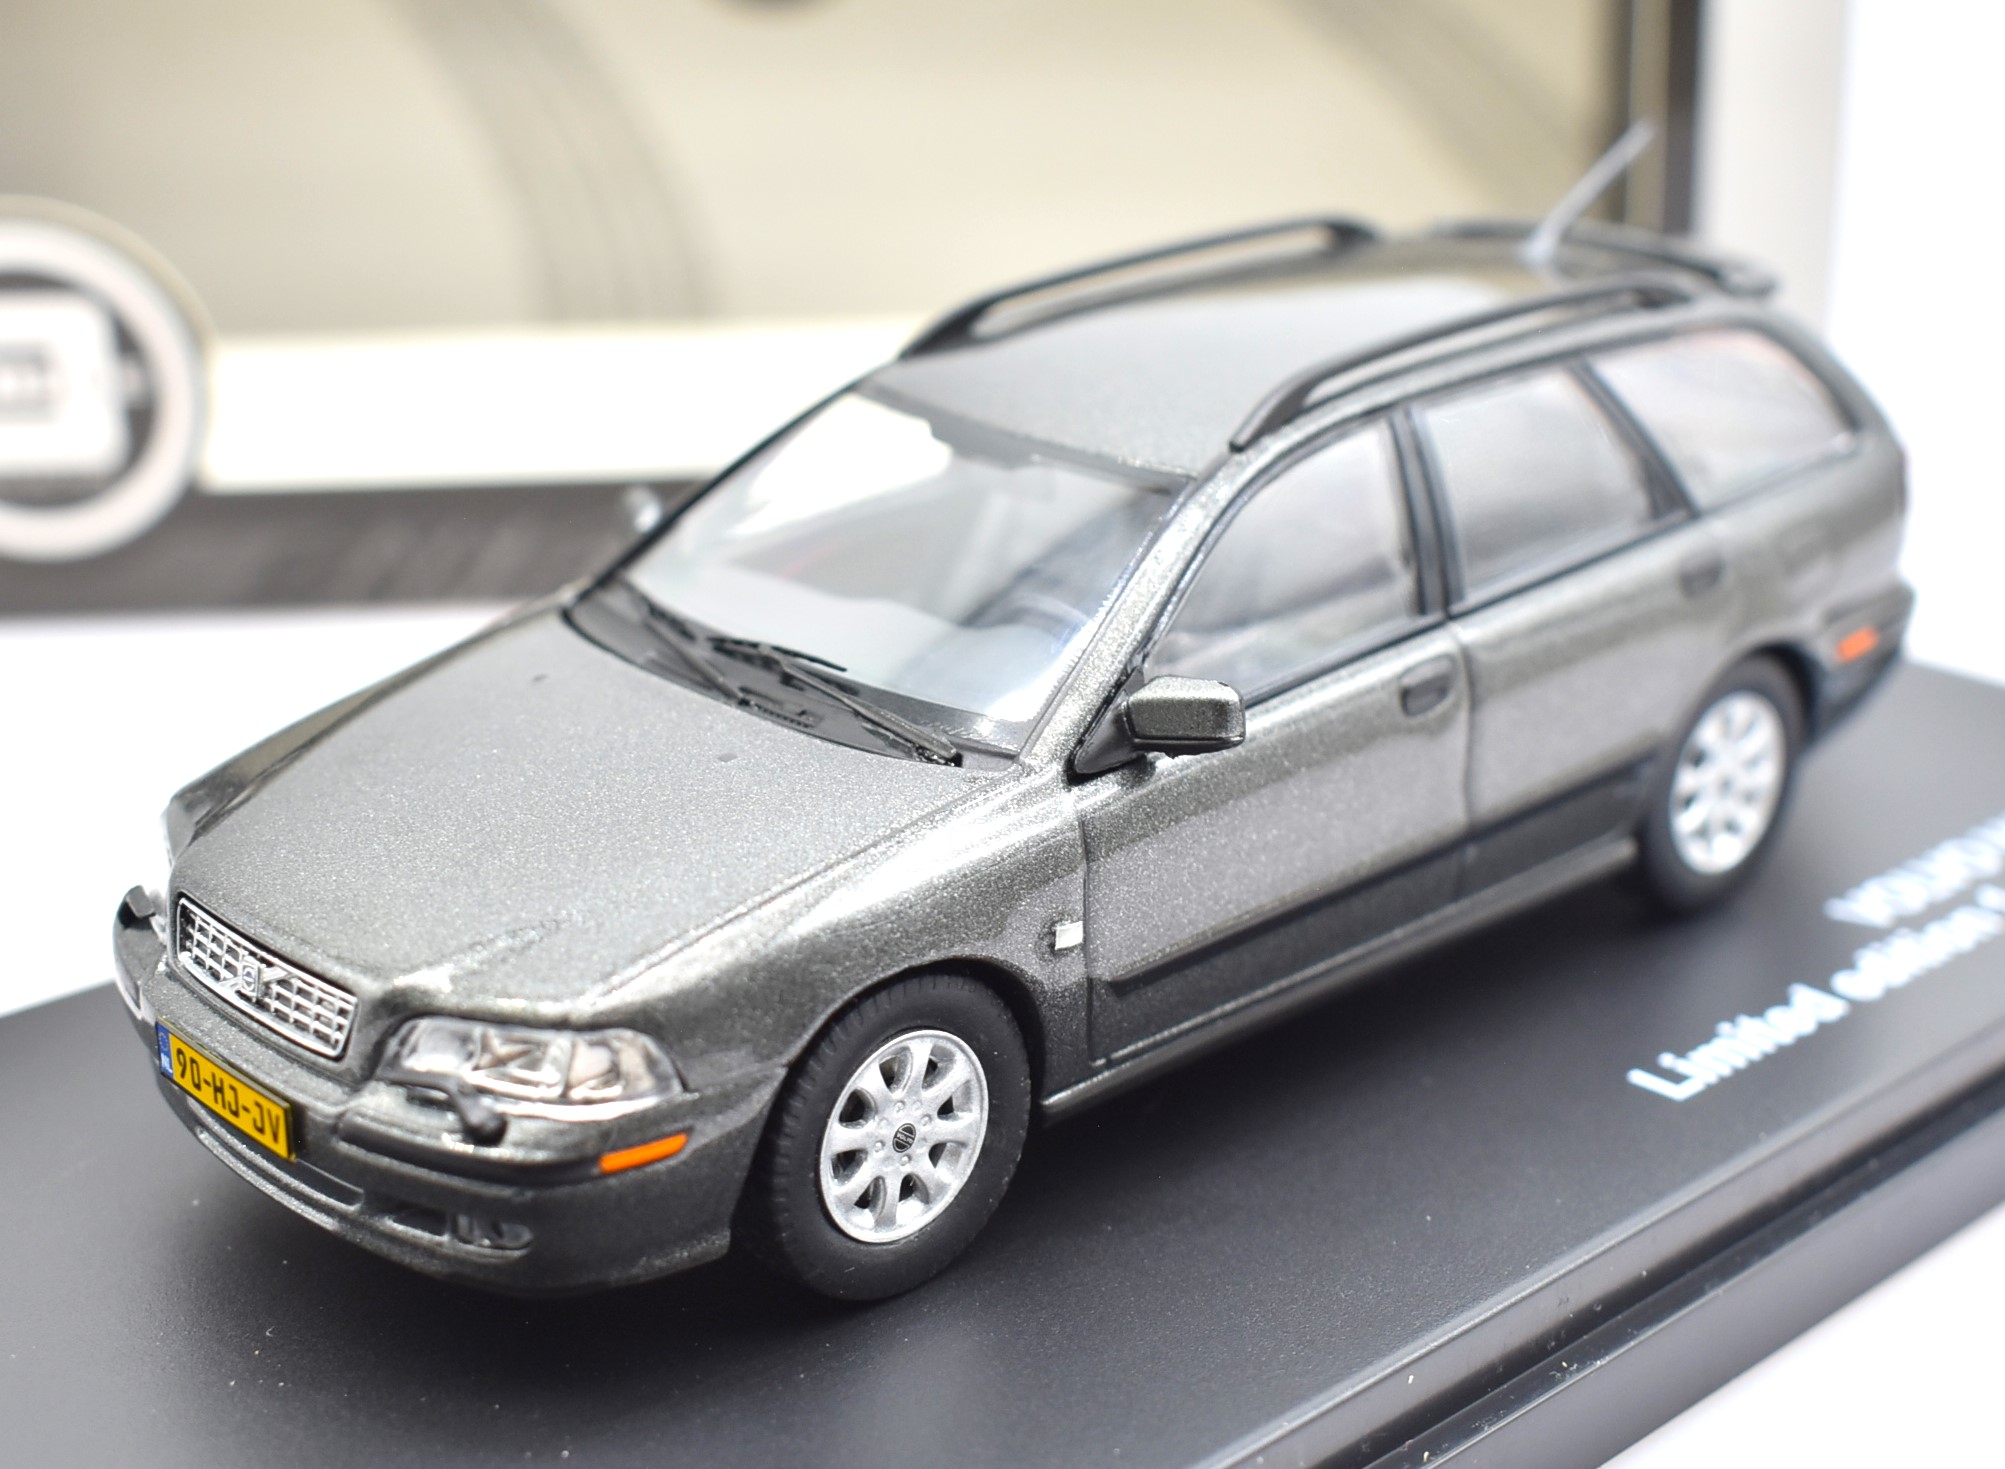 1:43 scale model car Volvo V40 diecast vehiclesroad fromcollection car